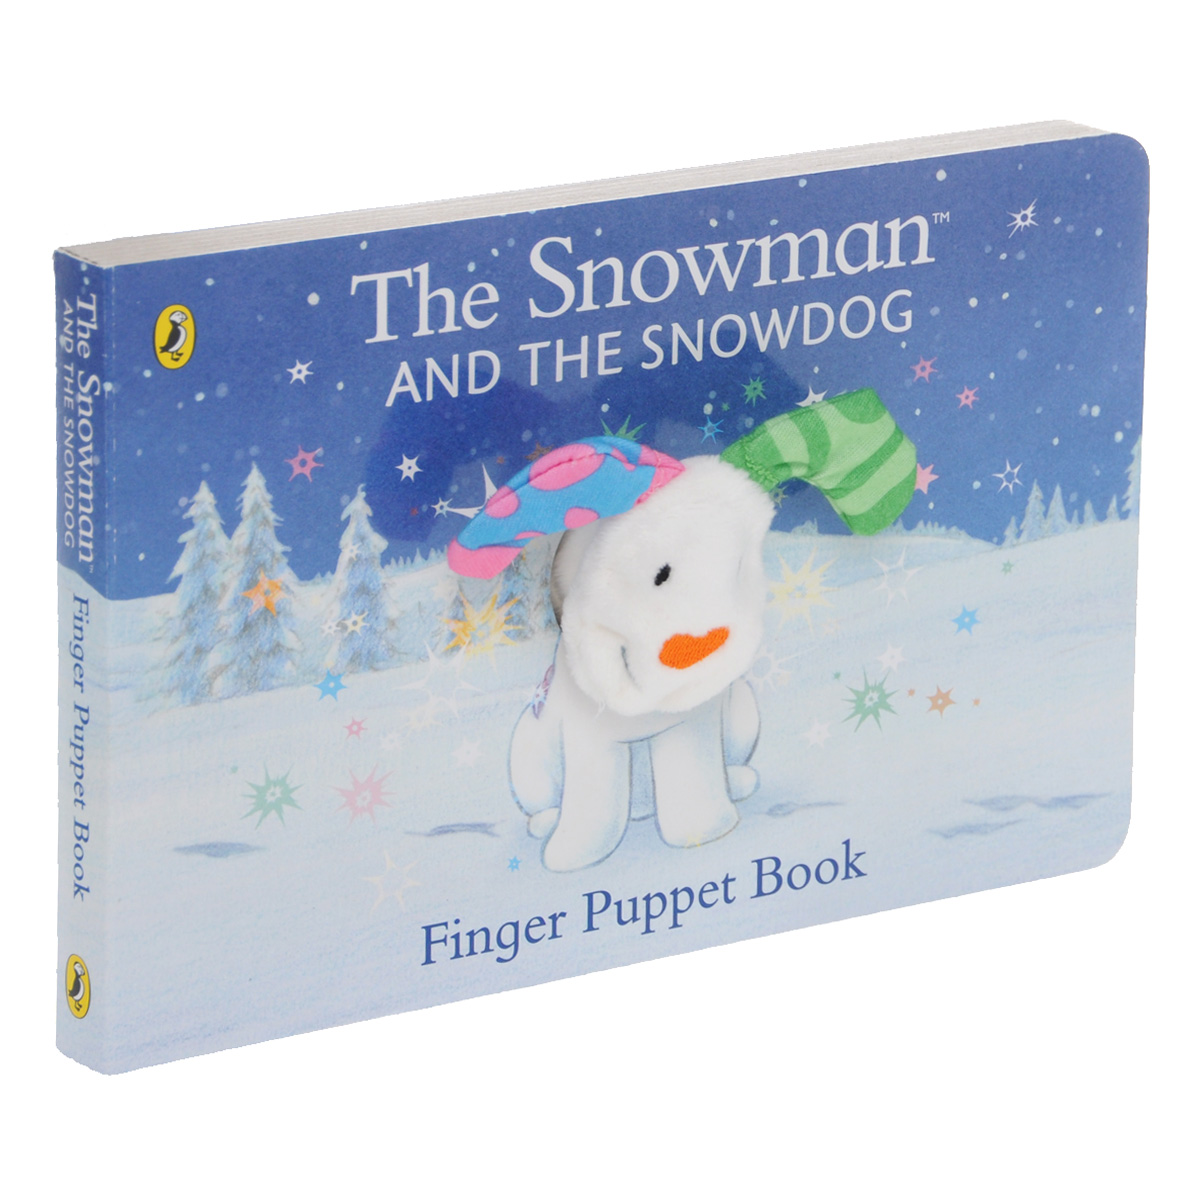 The Snowman and the Snowdog: Finger Puppet Book - Raymond Briggs12296407A brilliantly playful finger-puppet book featuring the Snowman and the Snowdog! A boy built a Snowman and a Snowdog. That night, they came to life...Wiggle your finger and play with the Snowman and the Snowdog in this fun finger-puppet book! When he comes to life, the Snowdog runs, plays and flies into the air with Billy and the Snowman. Look out for Raymond Briggs original classic, The Snowman, as well as the picture book of The Snowman and the Snowdog, too!